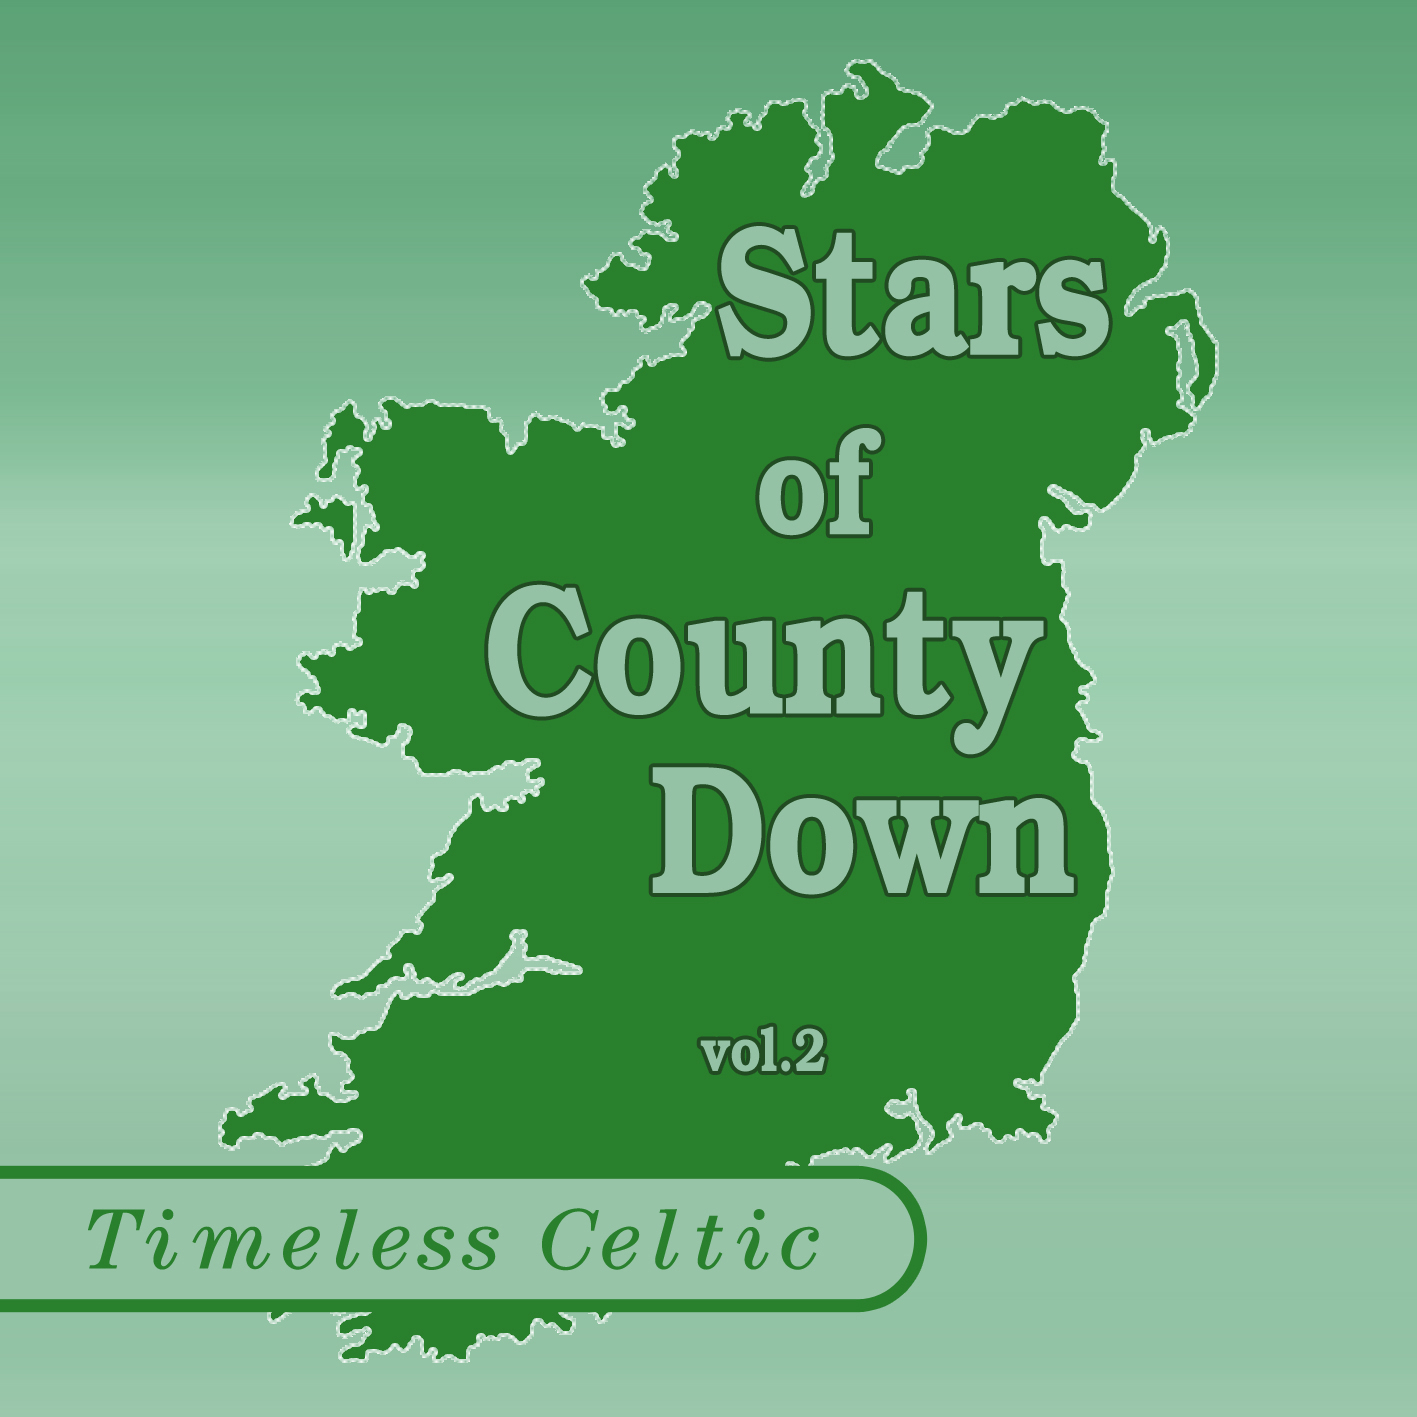 Timeless Celtic: Stars Of The County Down Vol 2